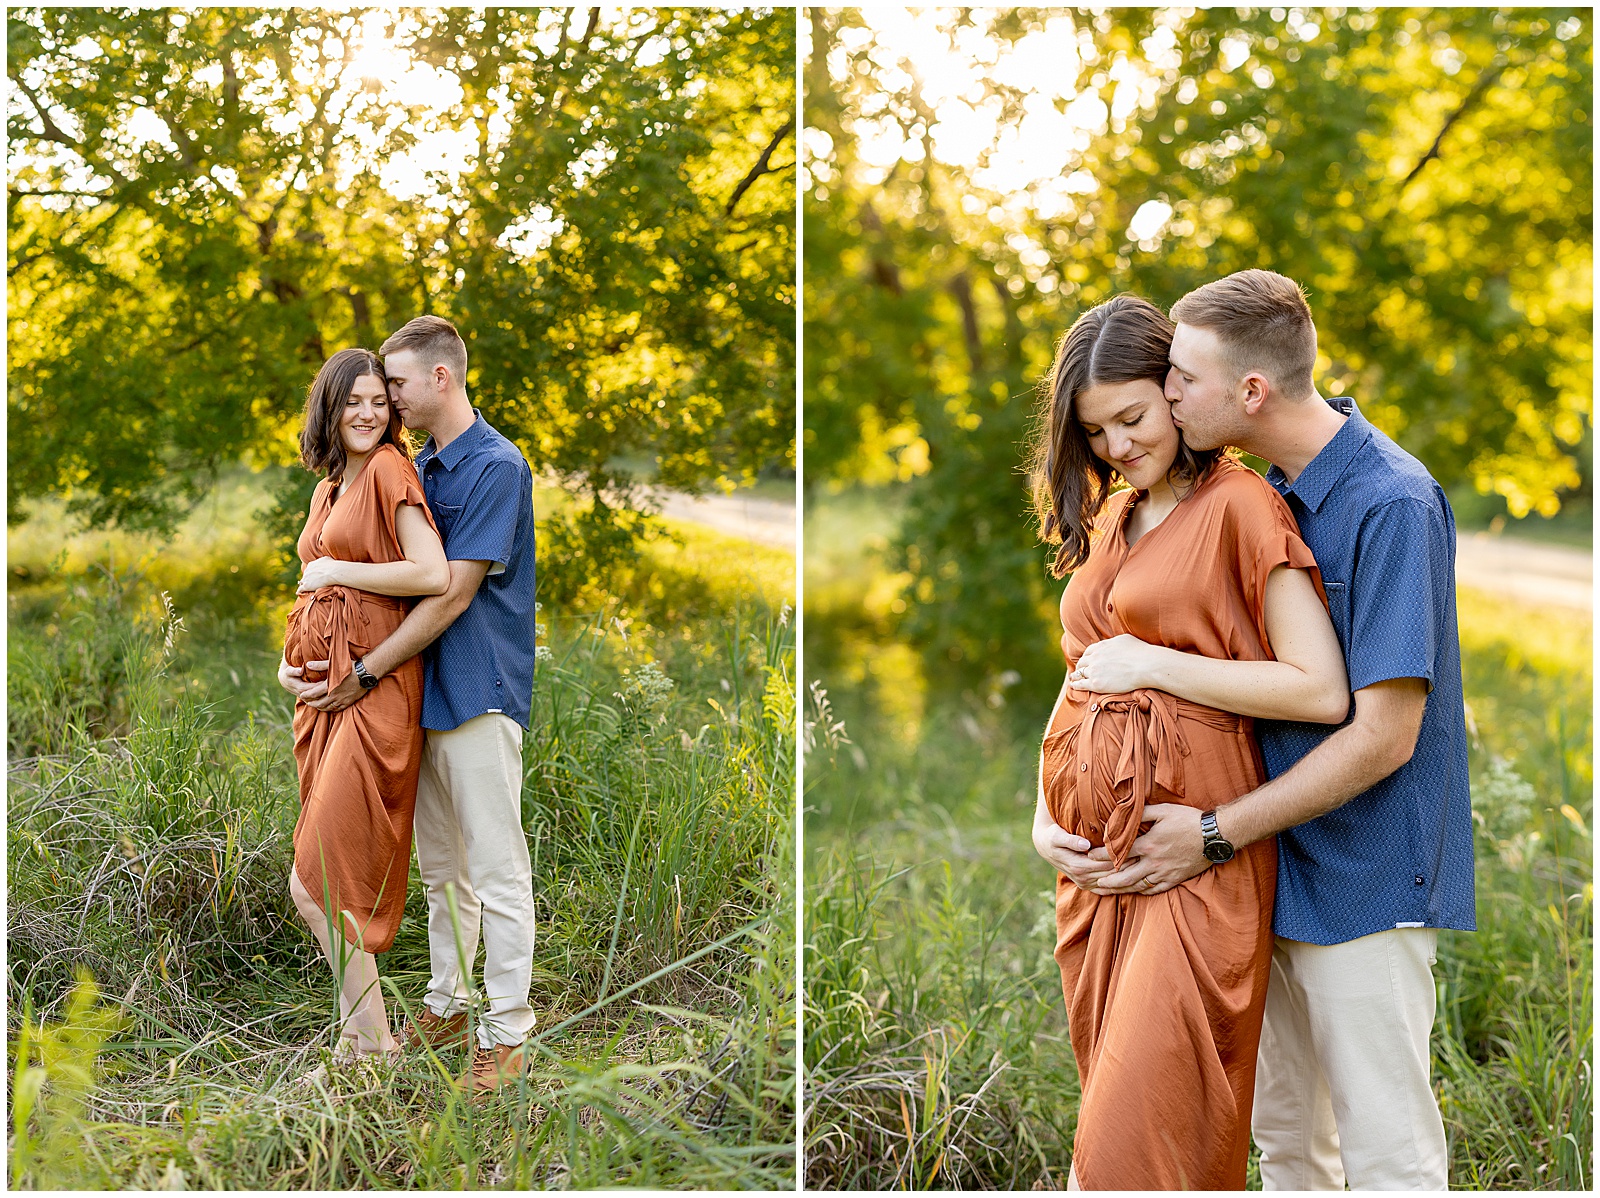 Sioux City Maternity Session,Sioux city maternity photographer,iowa maternity photographer,iowa maternity session,sioux city maternity,sioux city photographer,sioux city pregnancy photographer,